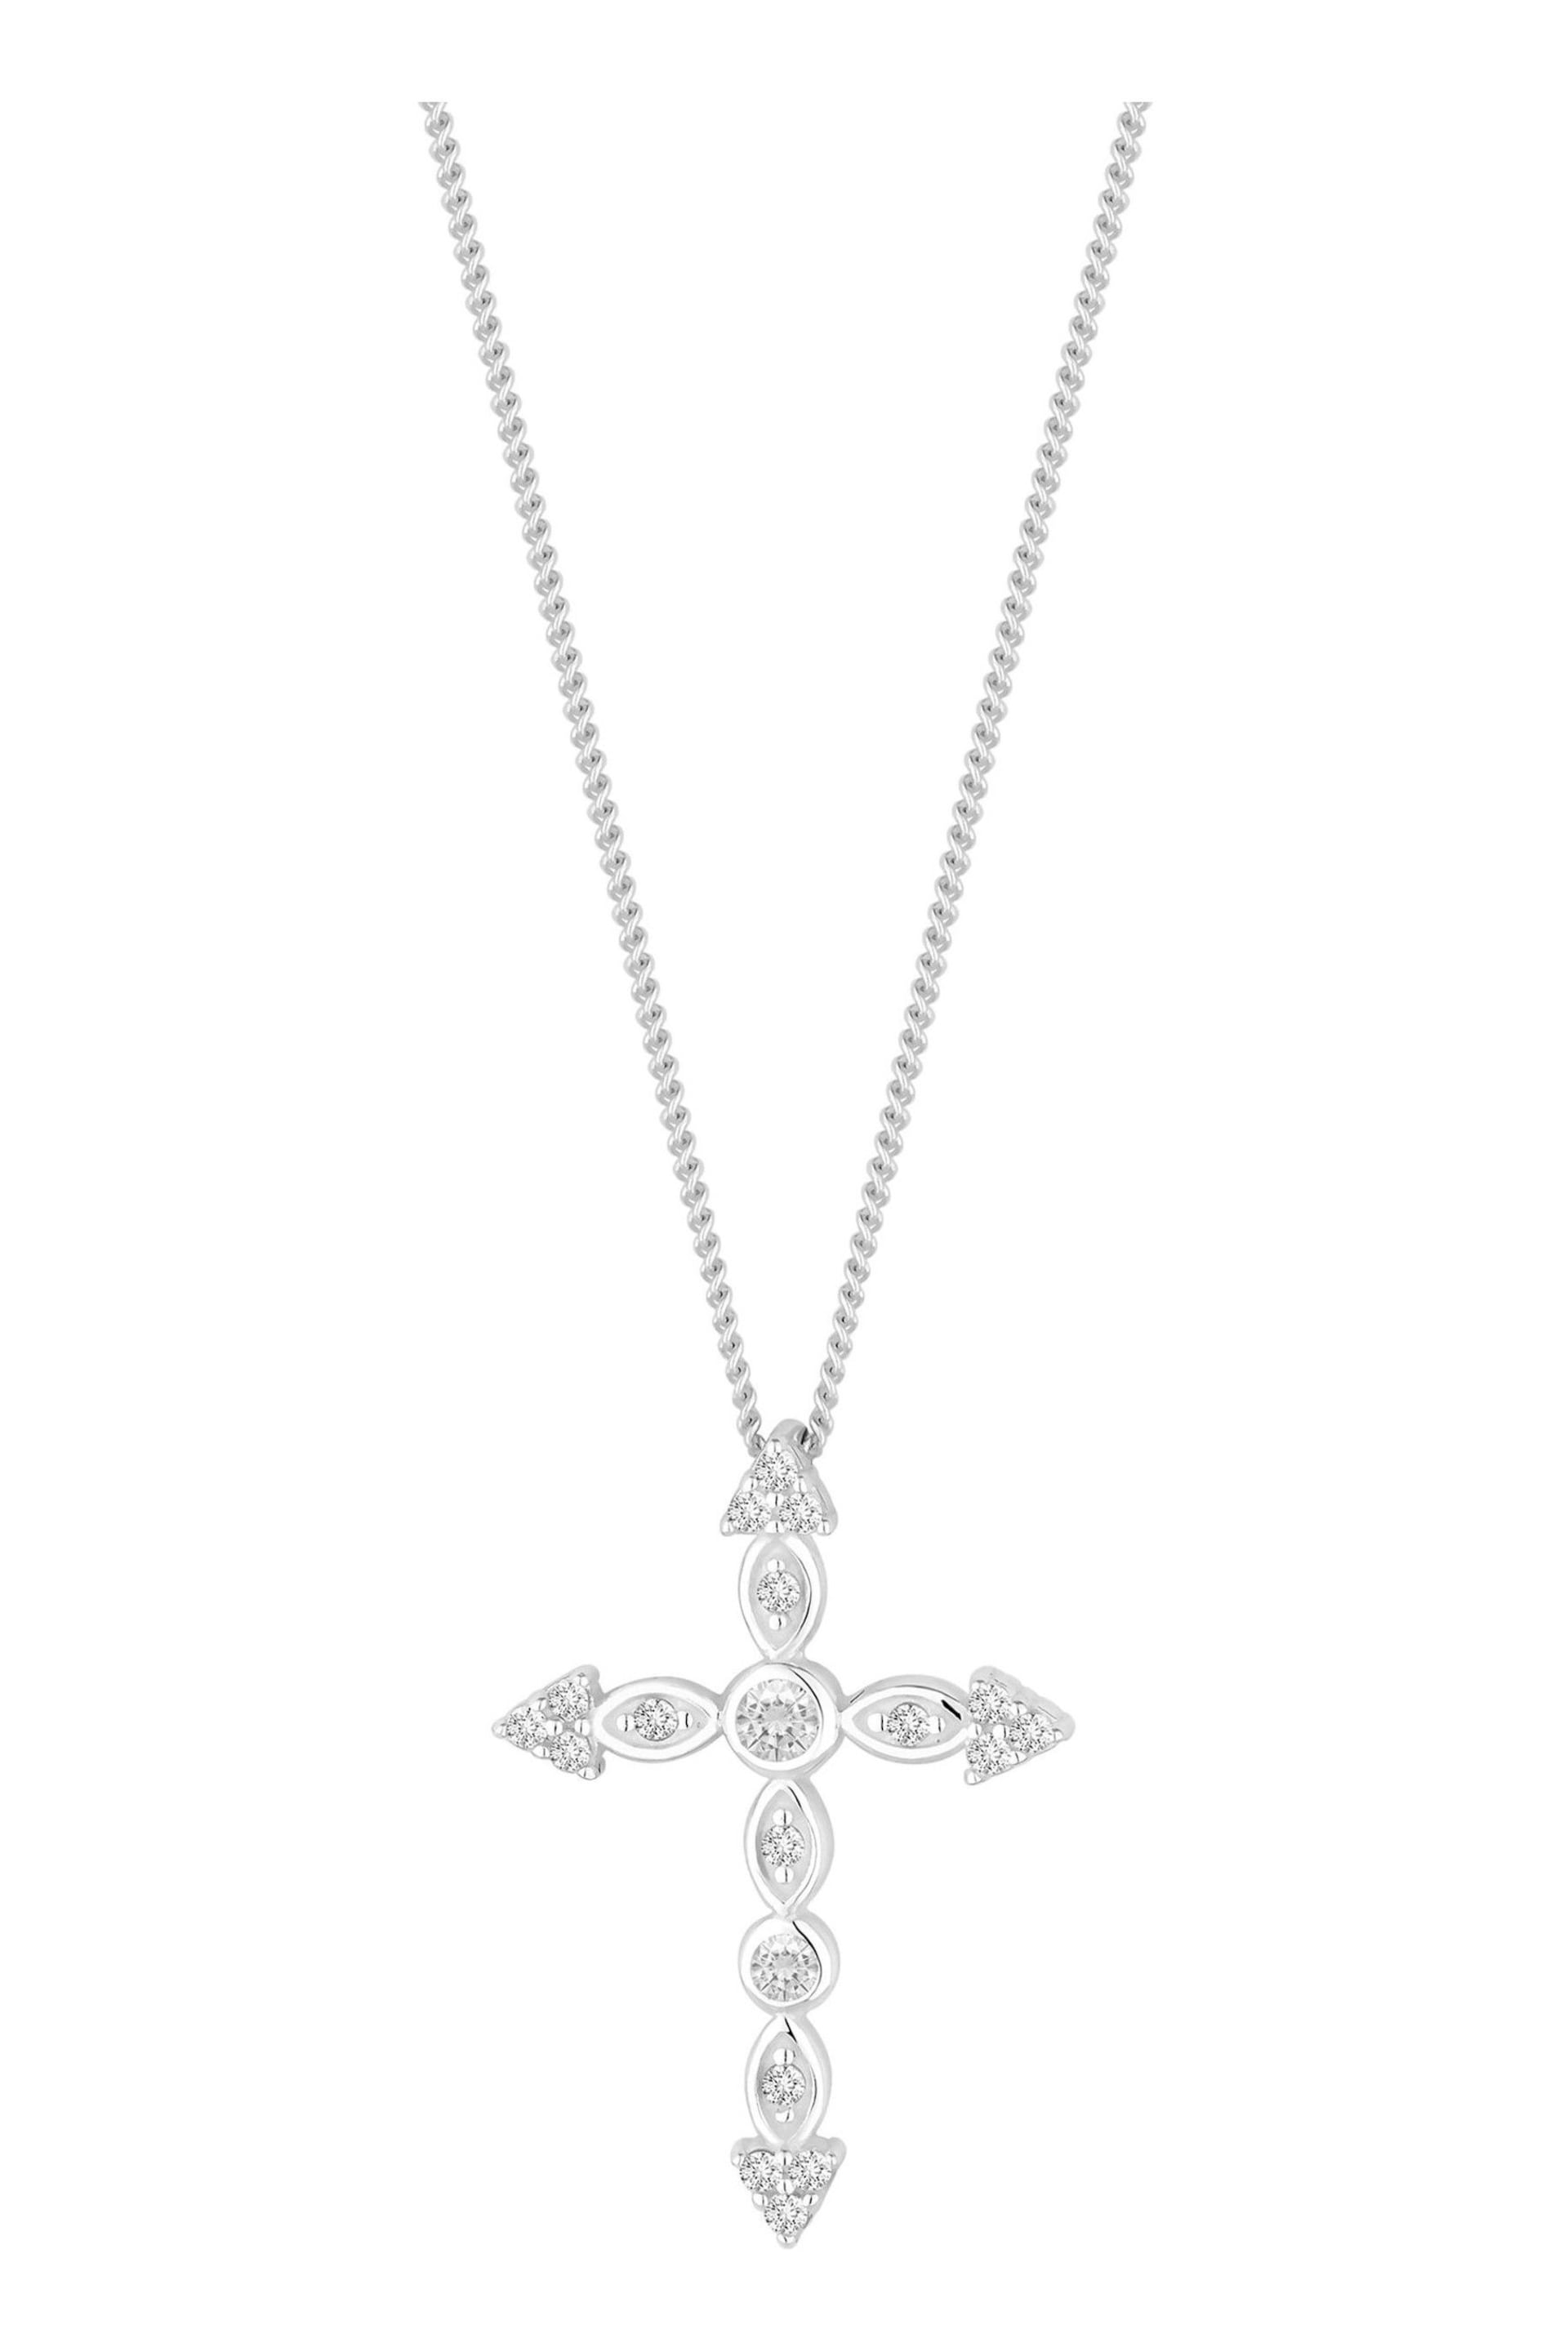 Simply Silver Silver Tone Cubic Zirconia Cross Pendant Necklace - Image 1 of 4